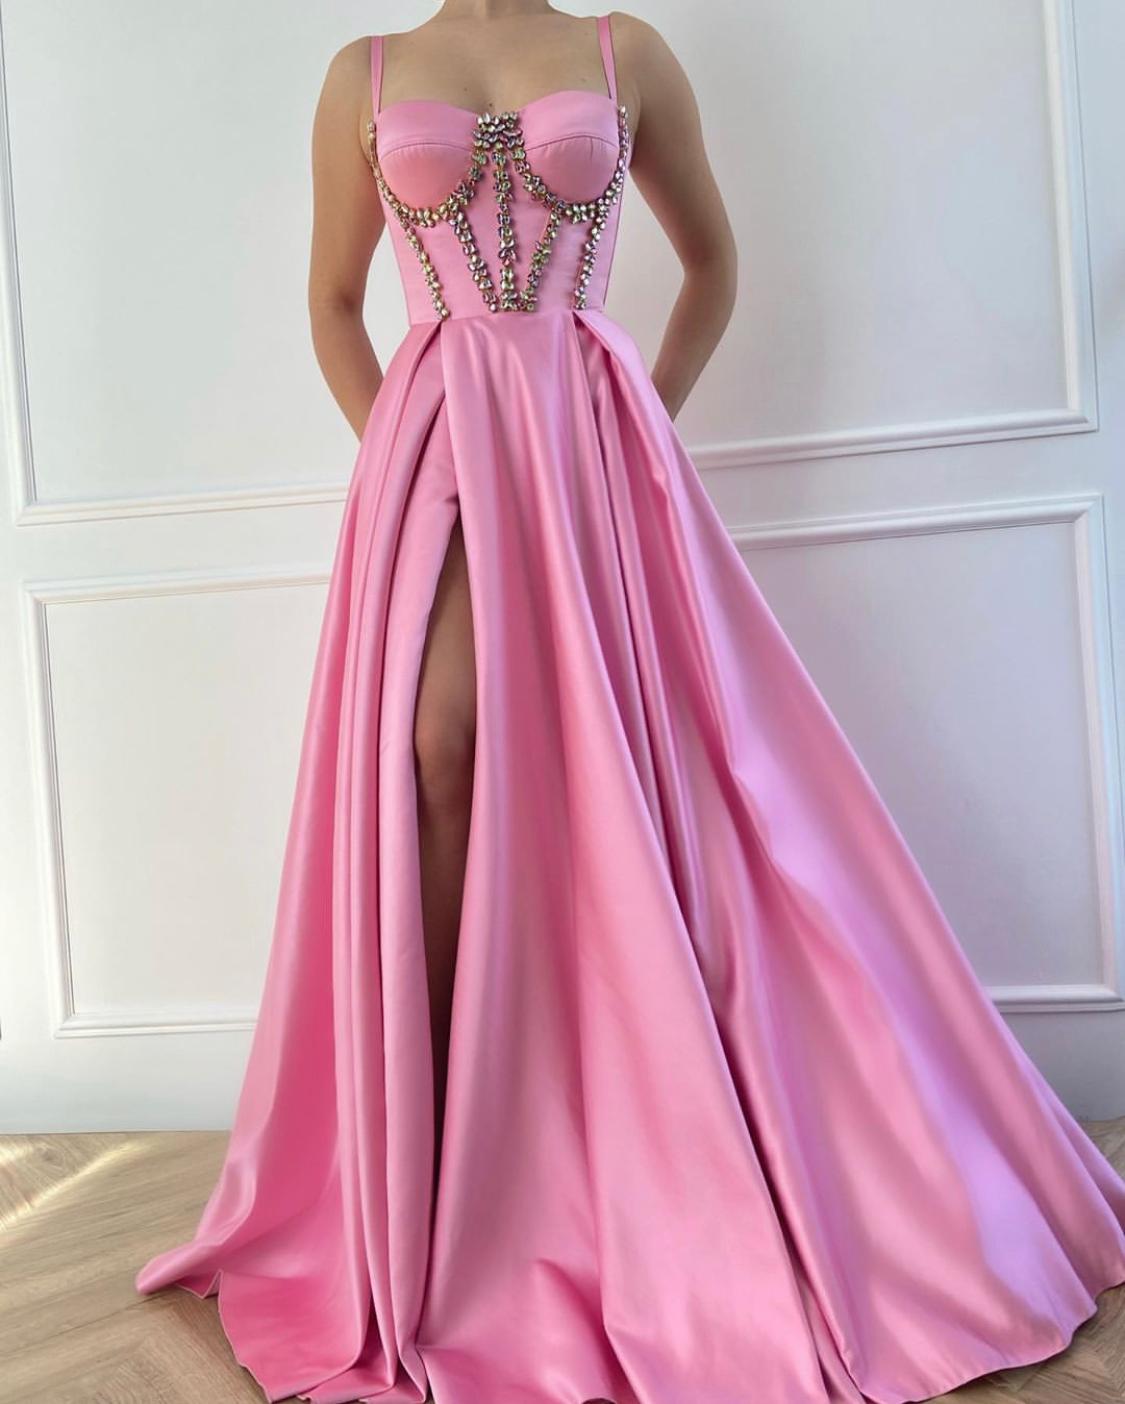 Pink Satin Prom Dress Bow Strapless One-Shoulder A-Line Sleeveless Party  Gowns | eBay